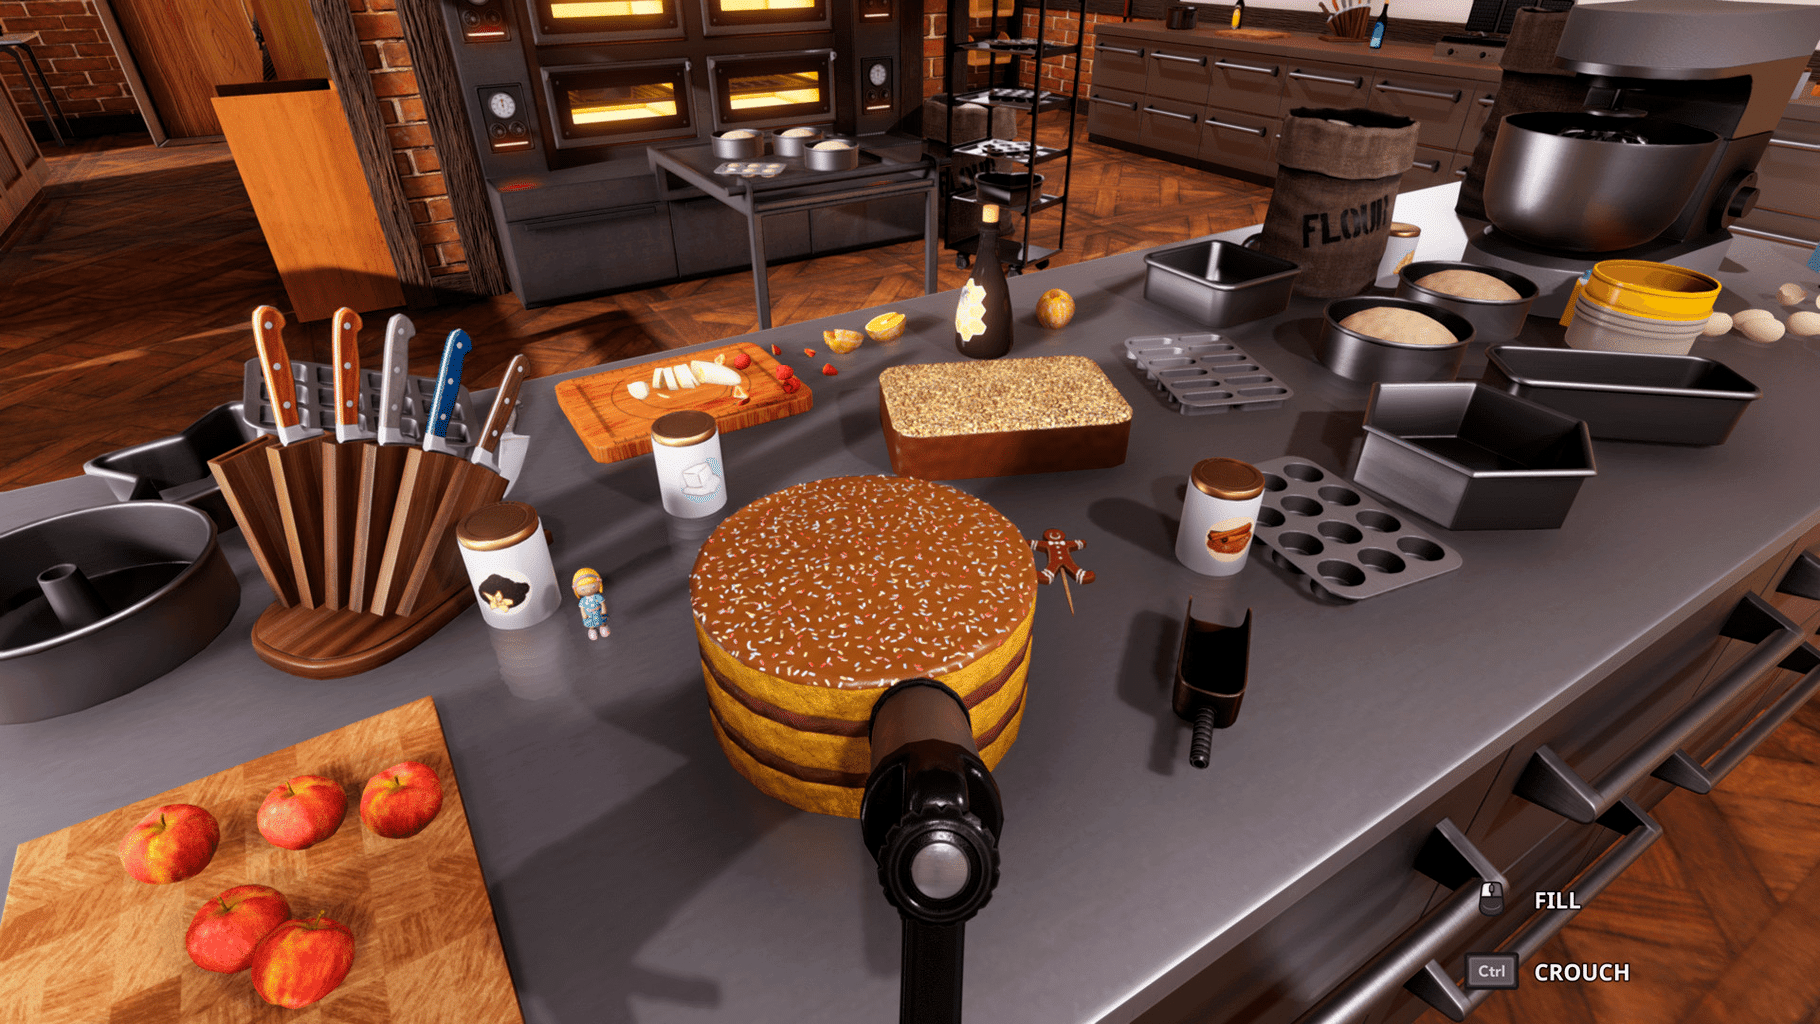 Cooking Simulator: Cakes and Cookies (2020)